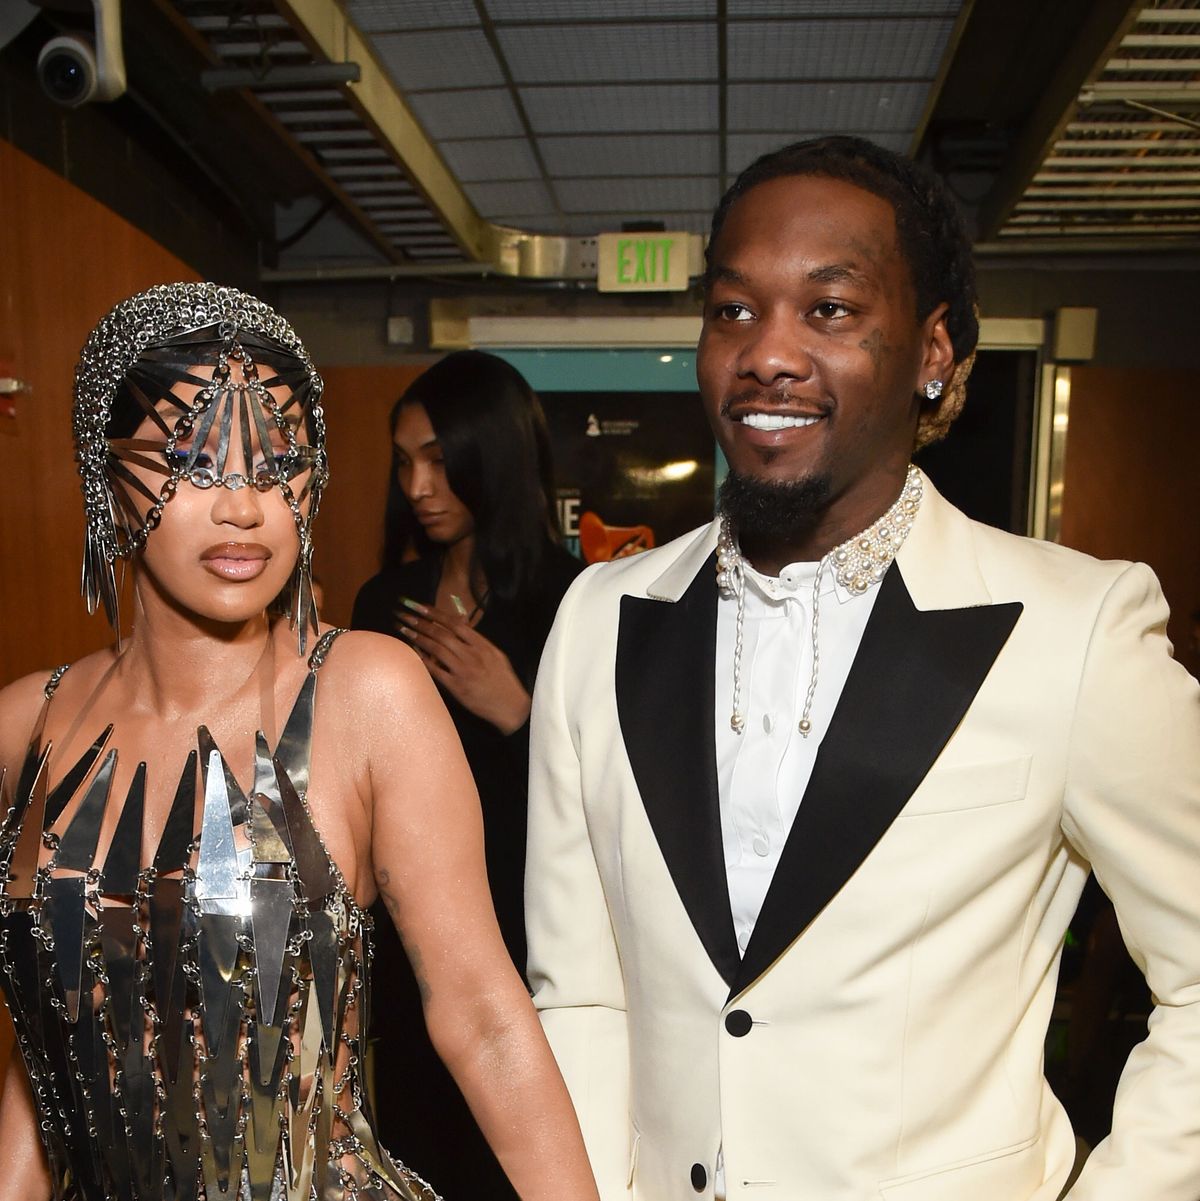 Cardi B Shows Skin in Metal Bra and Briefs at 2021 Grammys Outfit